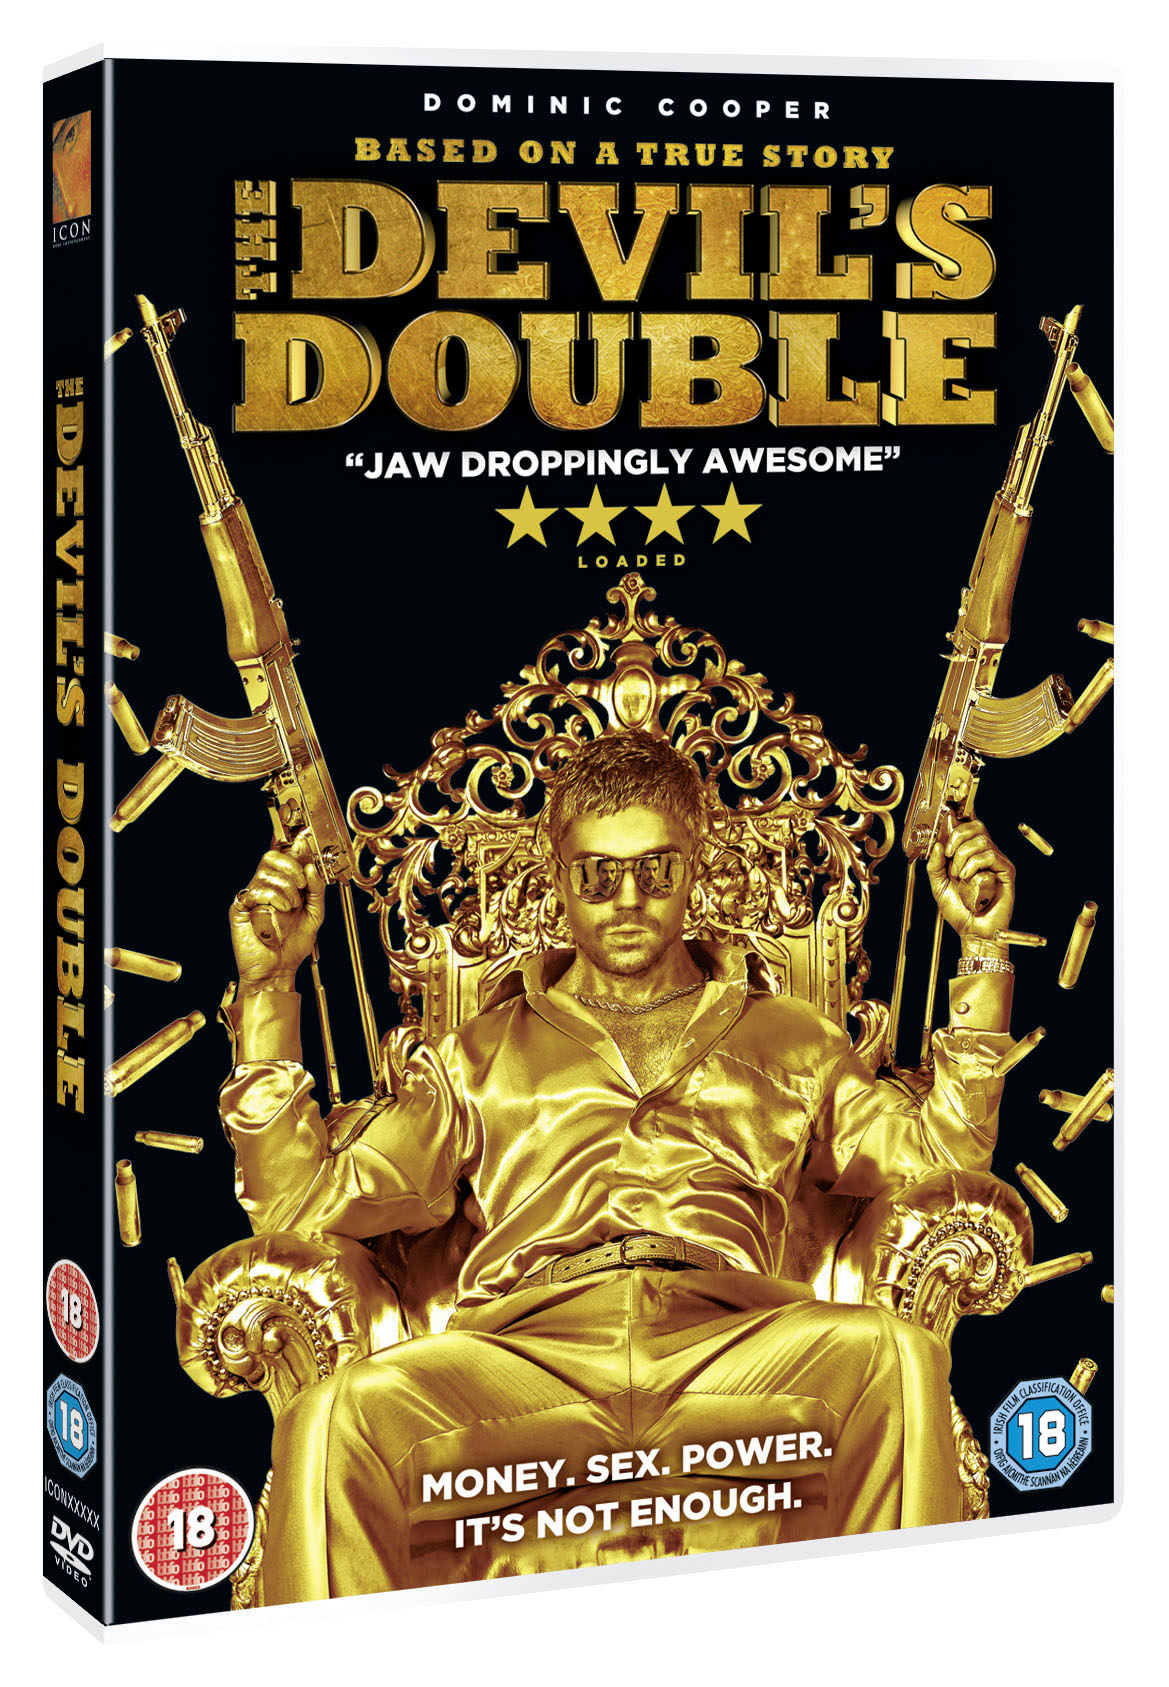 boom competitions - The Devil's Double